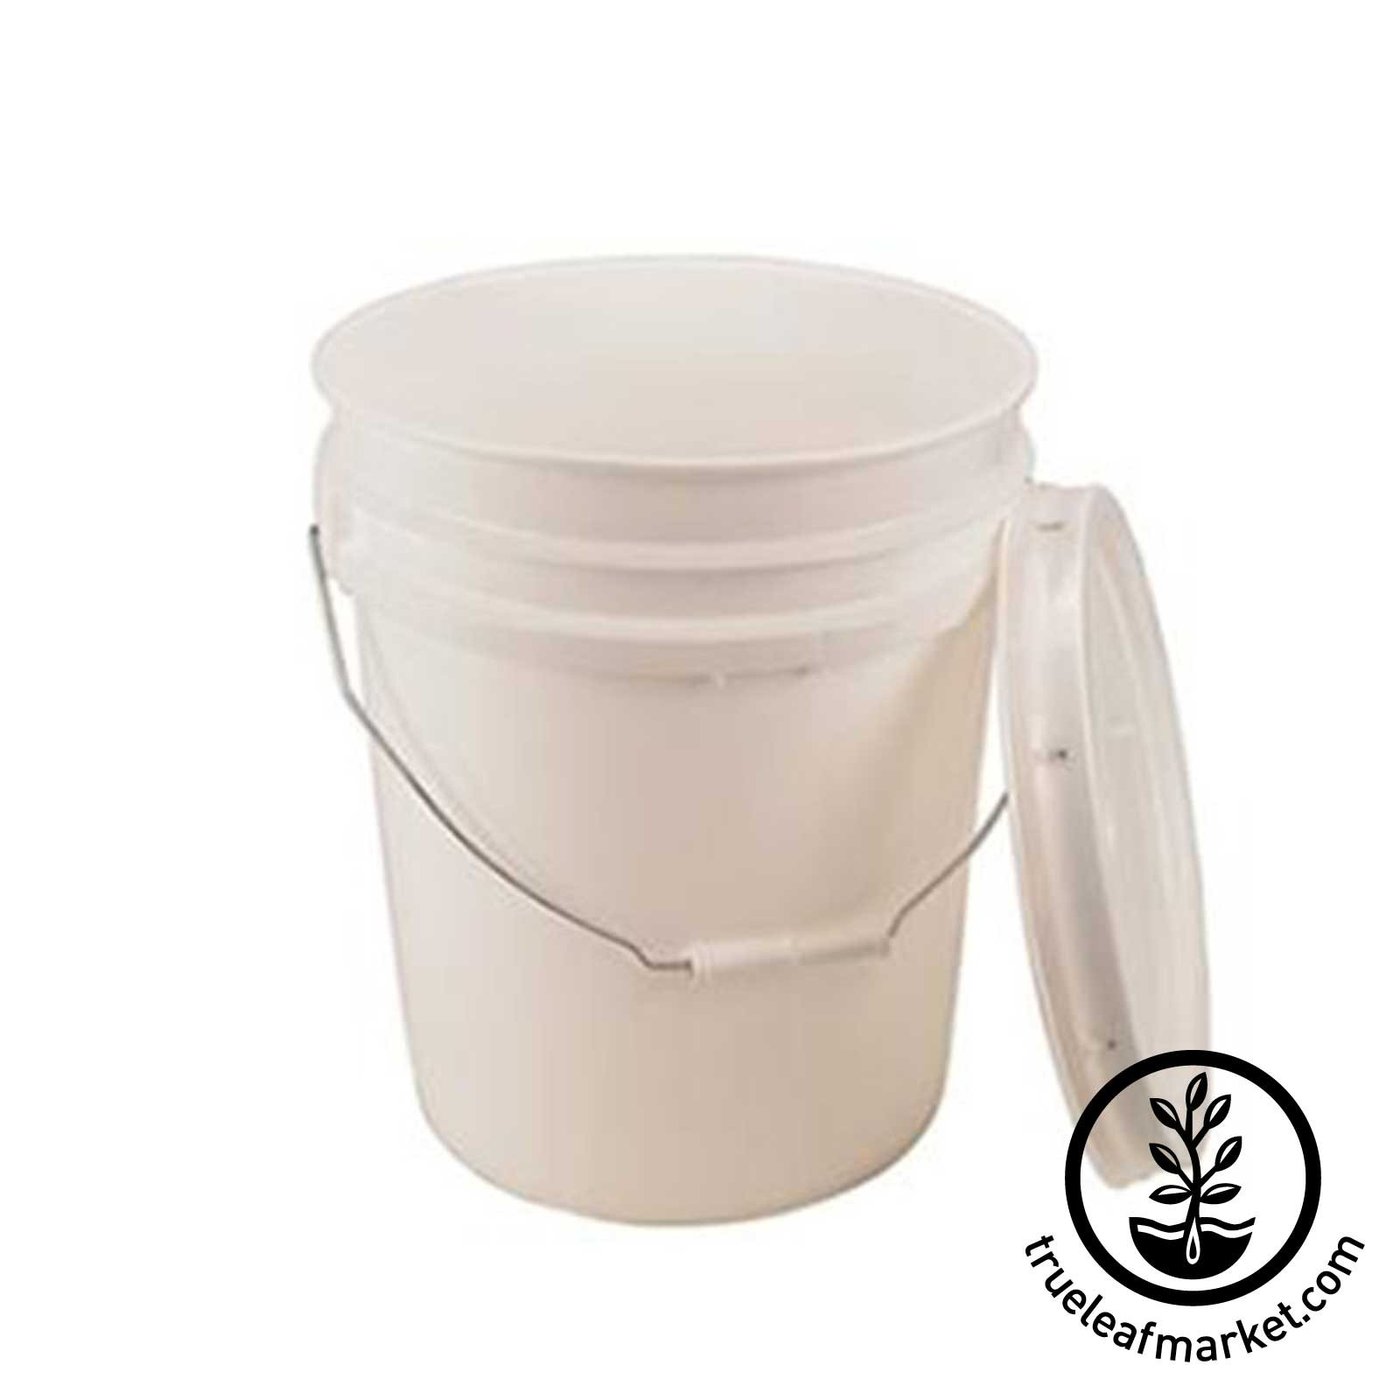 5 Gallon Food Grade Bucket | Storage Pail With Handle & Lid